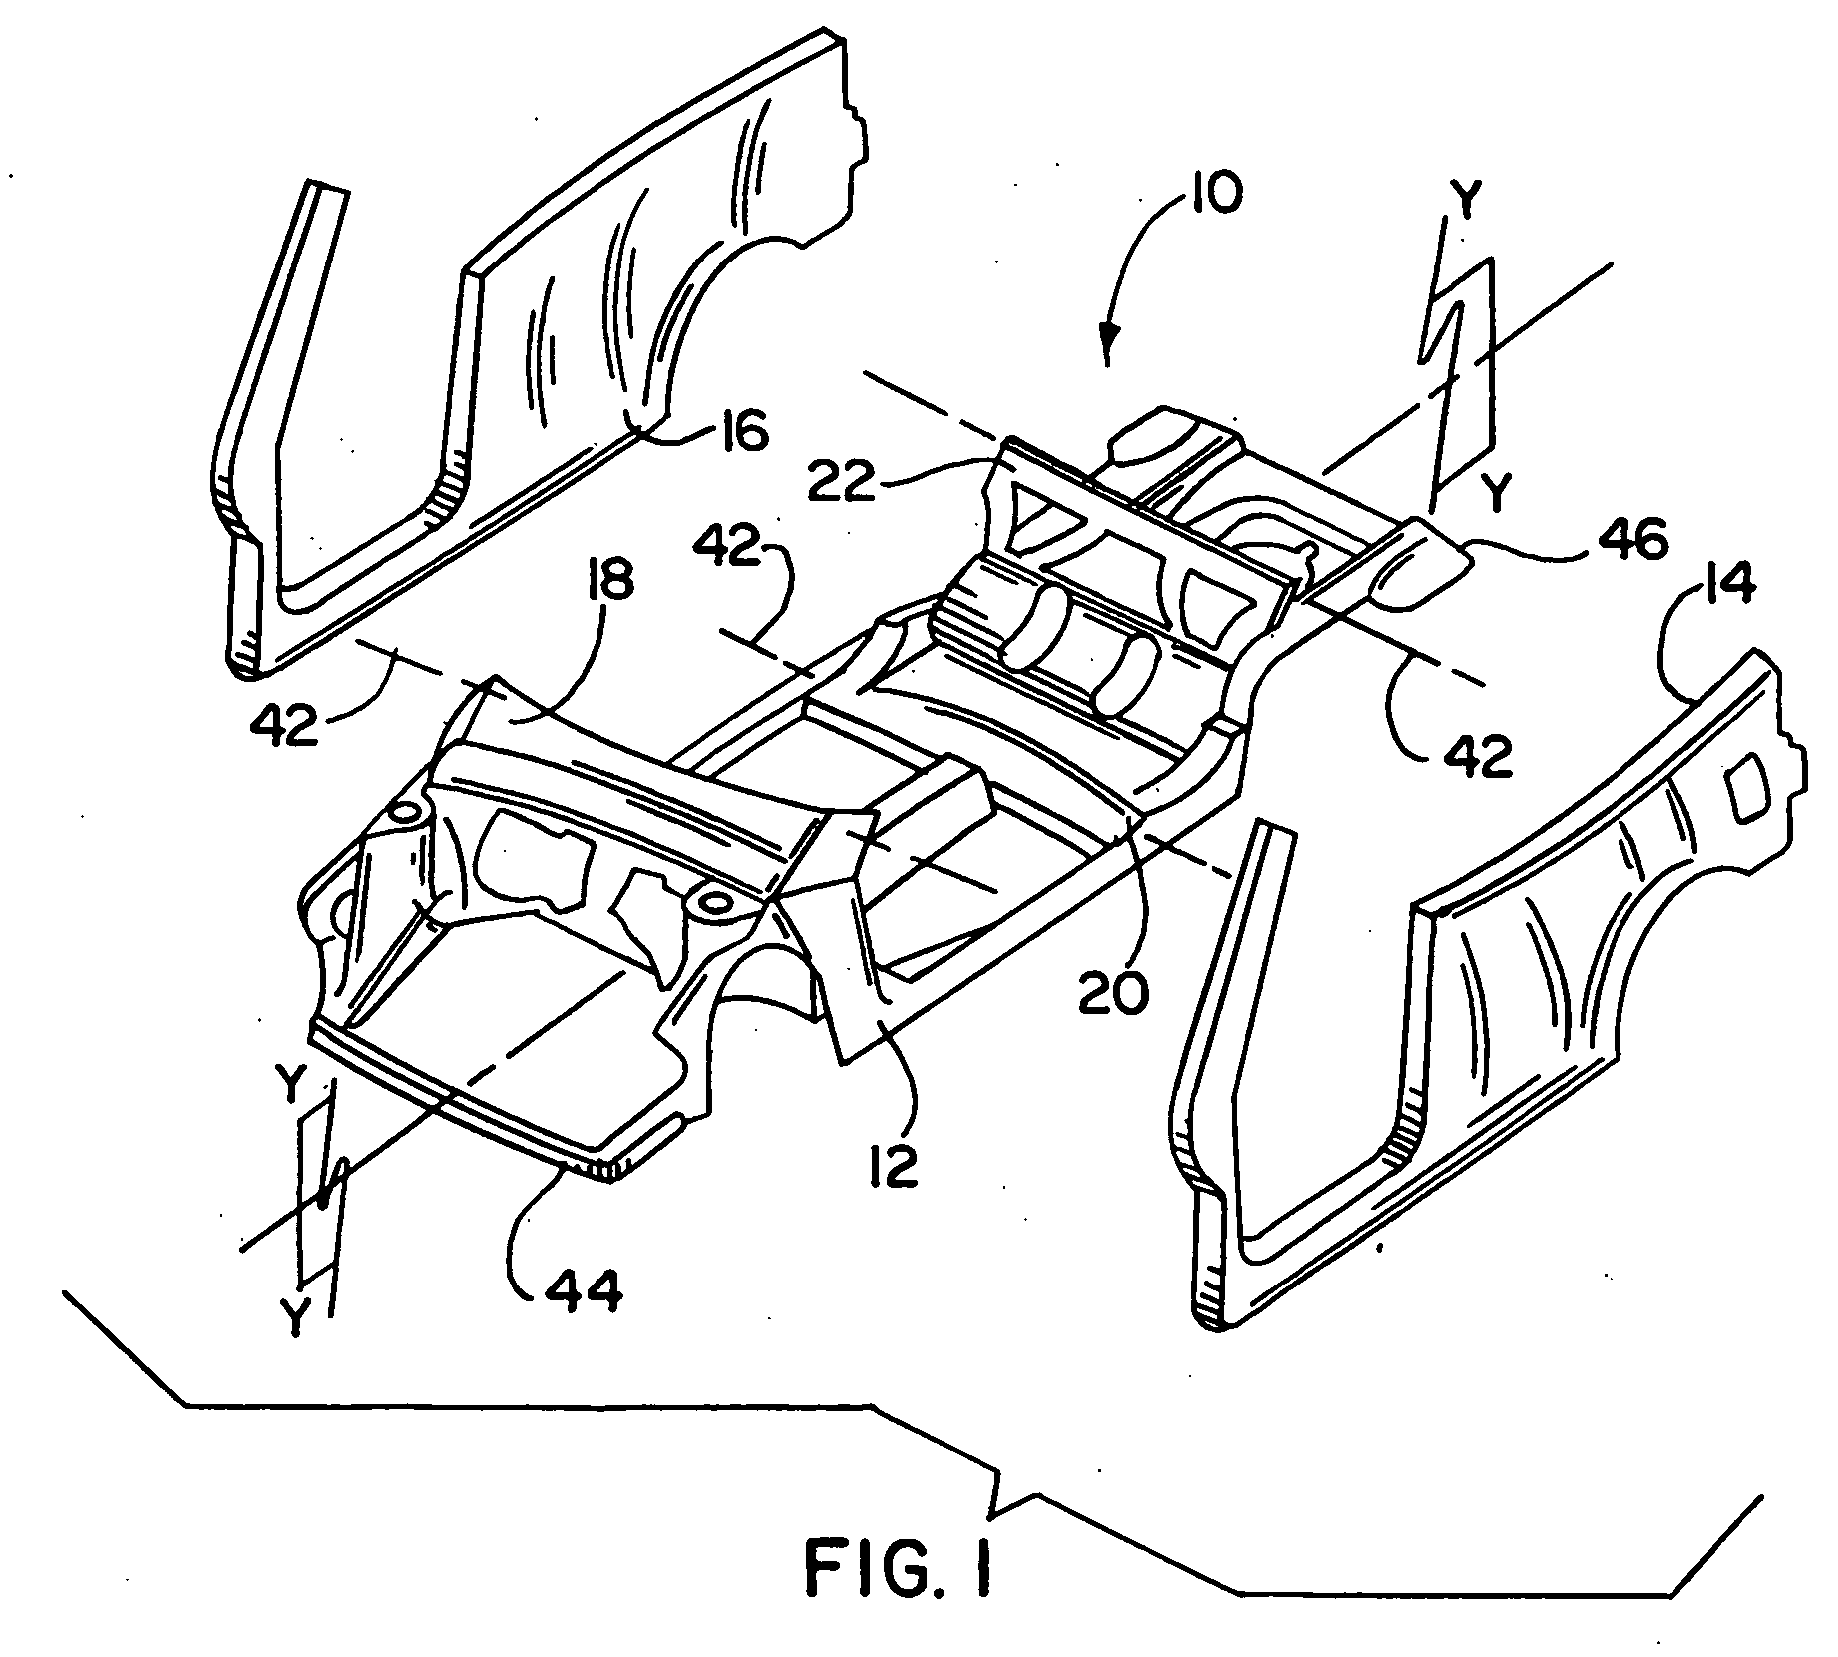 Convertible vehicle uni-body having an internal supplemental support structure